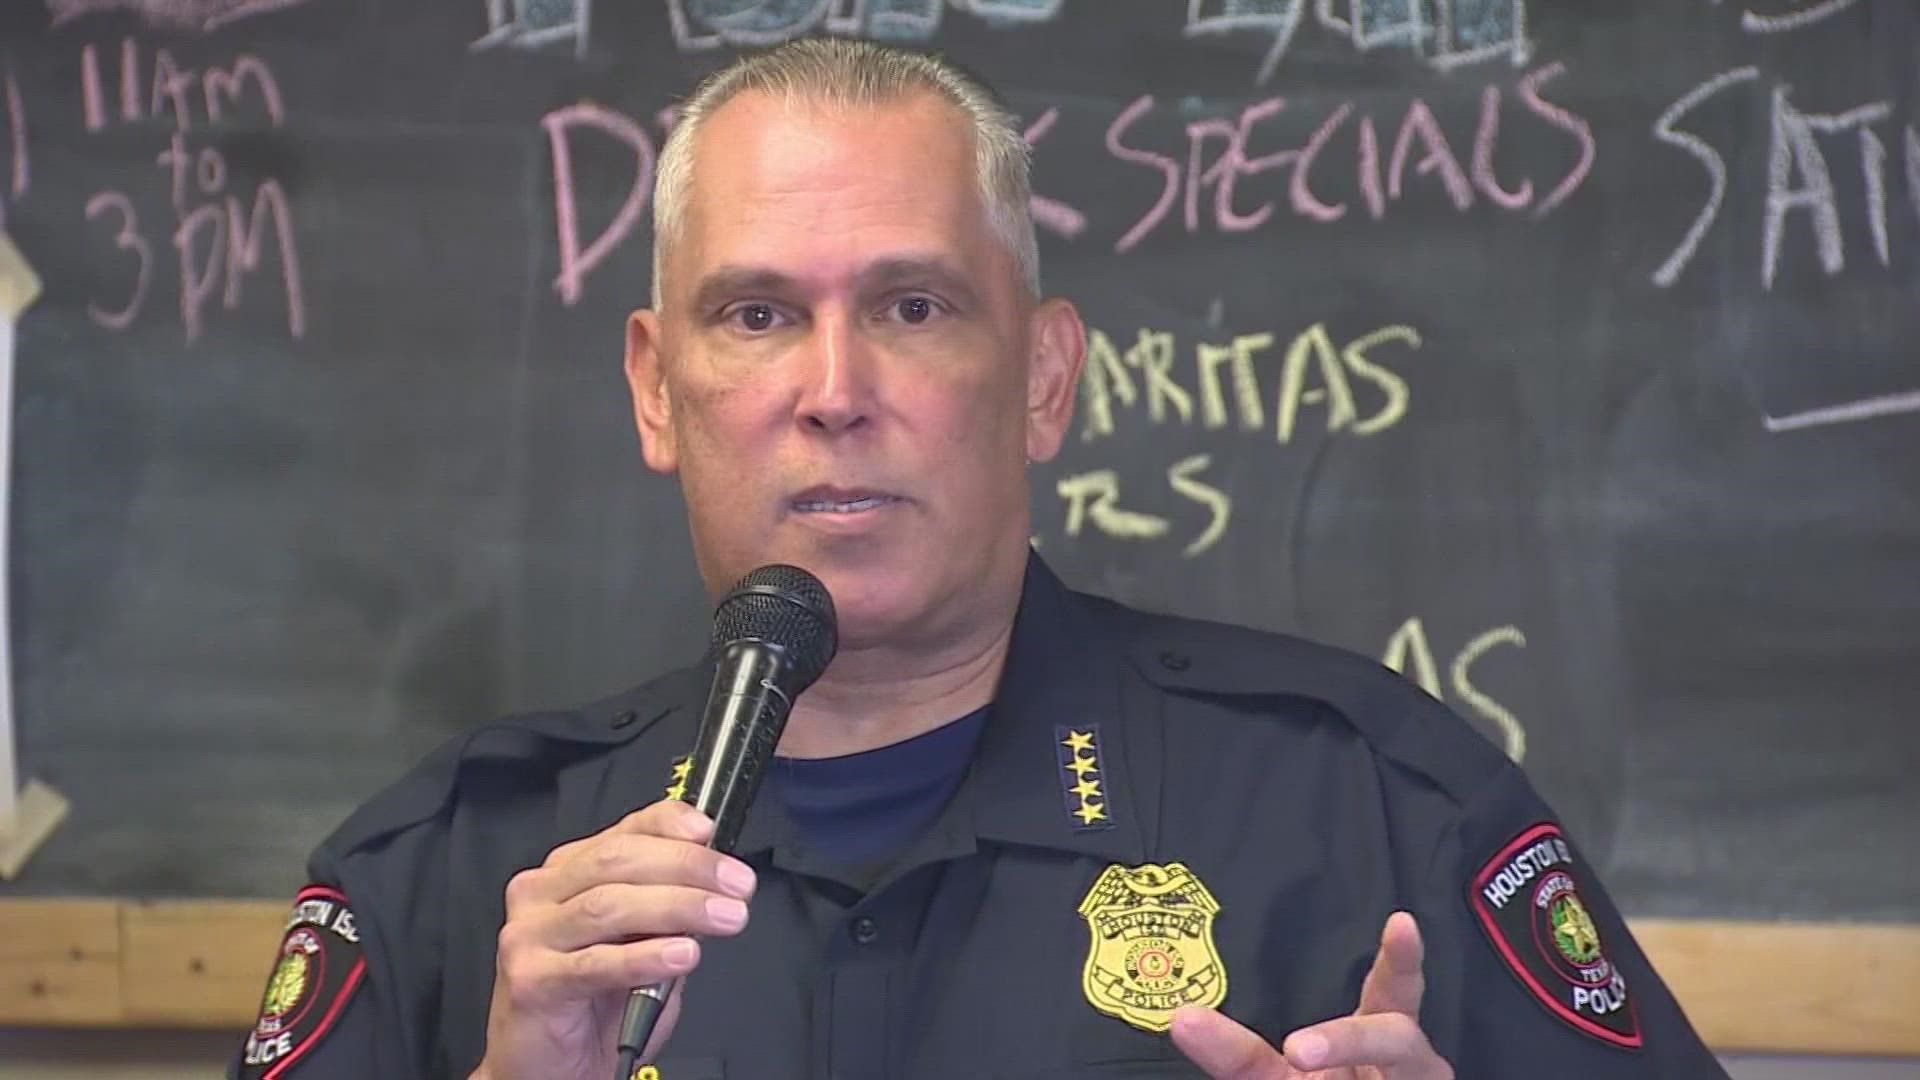 Houston ISD on Saturday held a Q&A session on school safety on the city's east end.